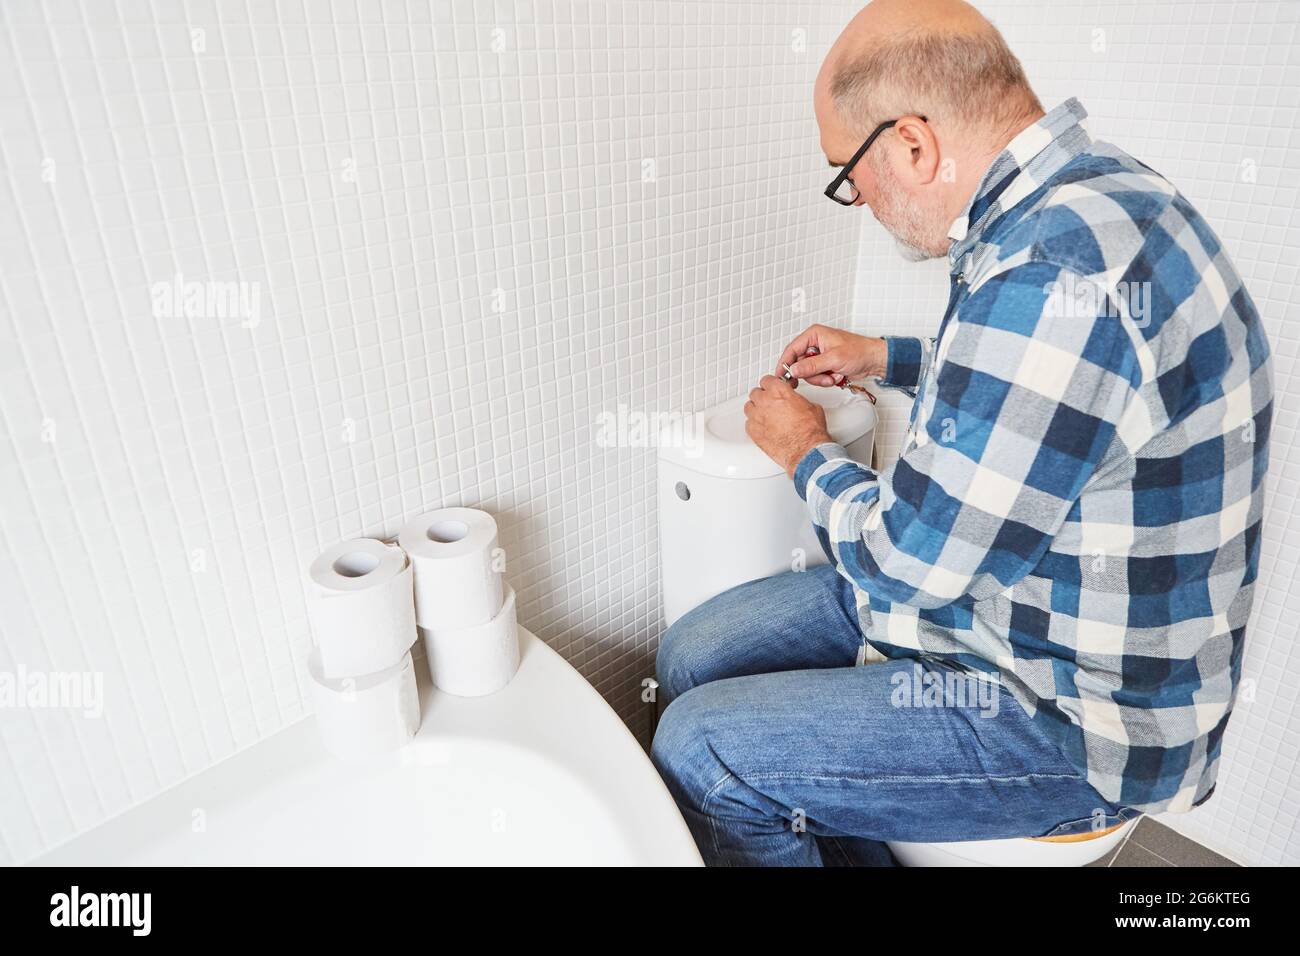 Plumber or do-it-yourselfer repairing the toilet flush on the toilet cistern Stock Photo